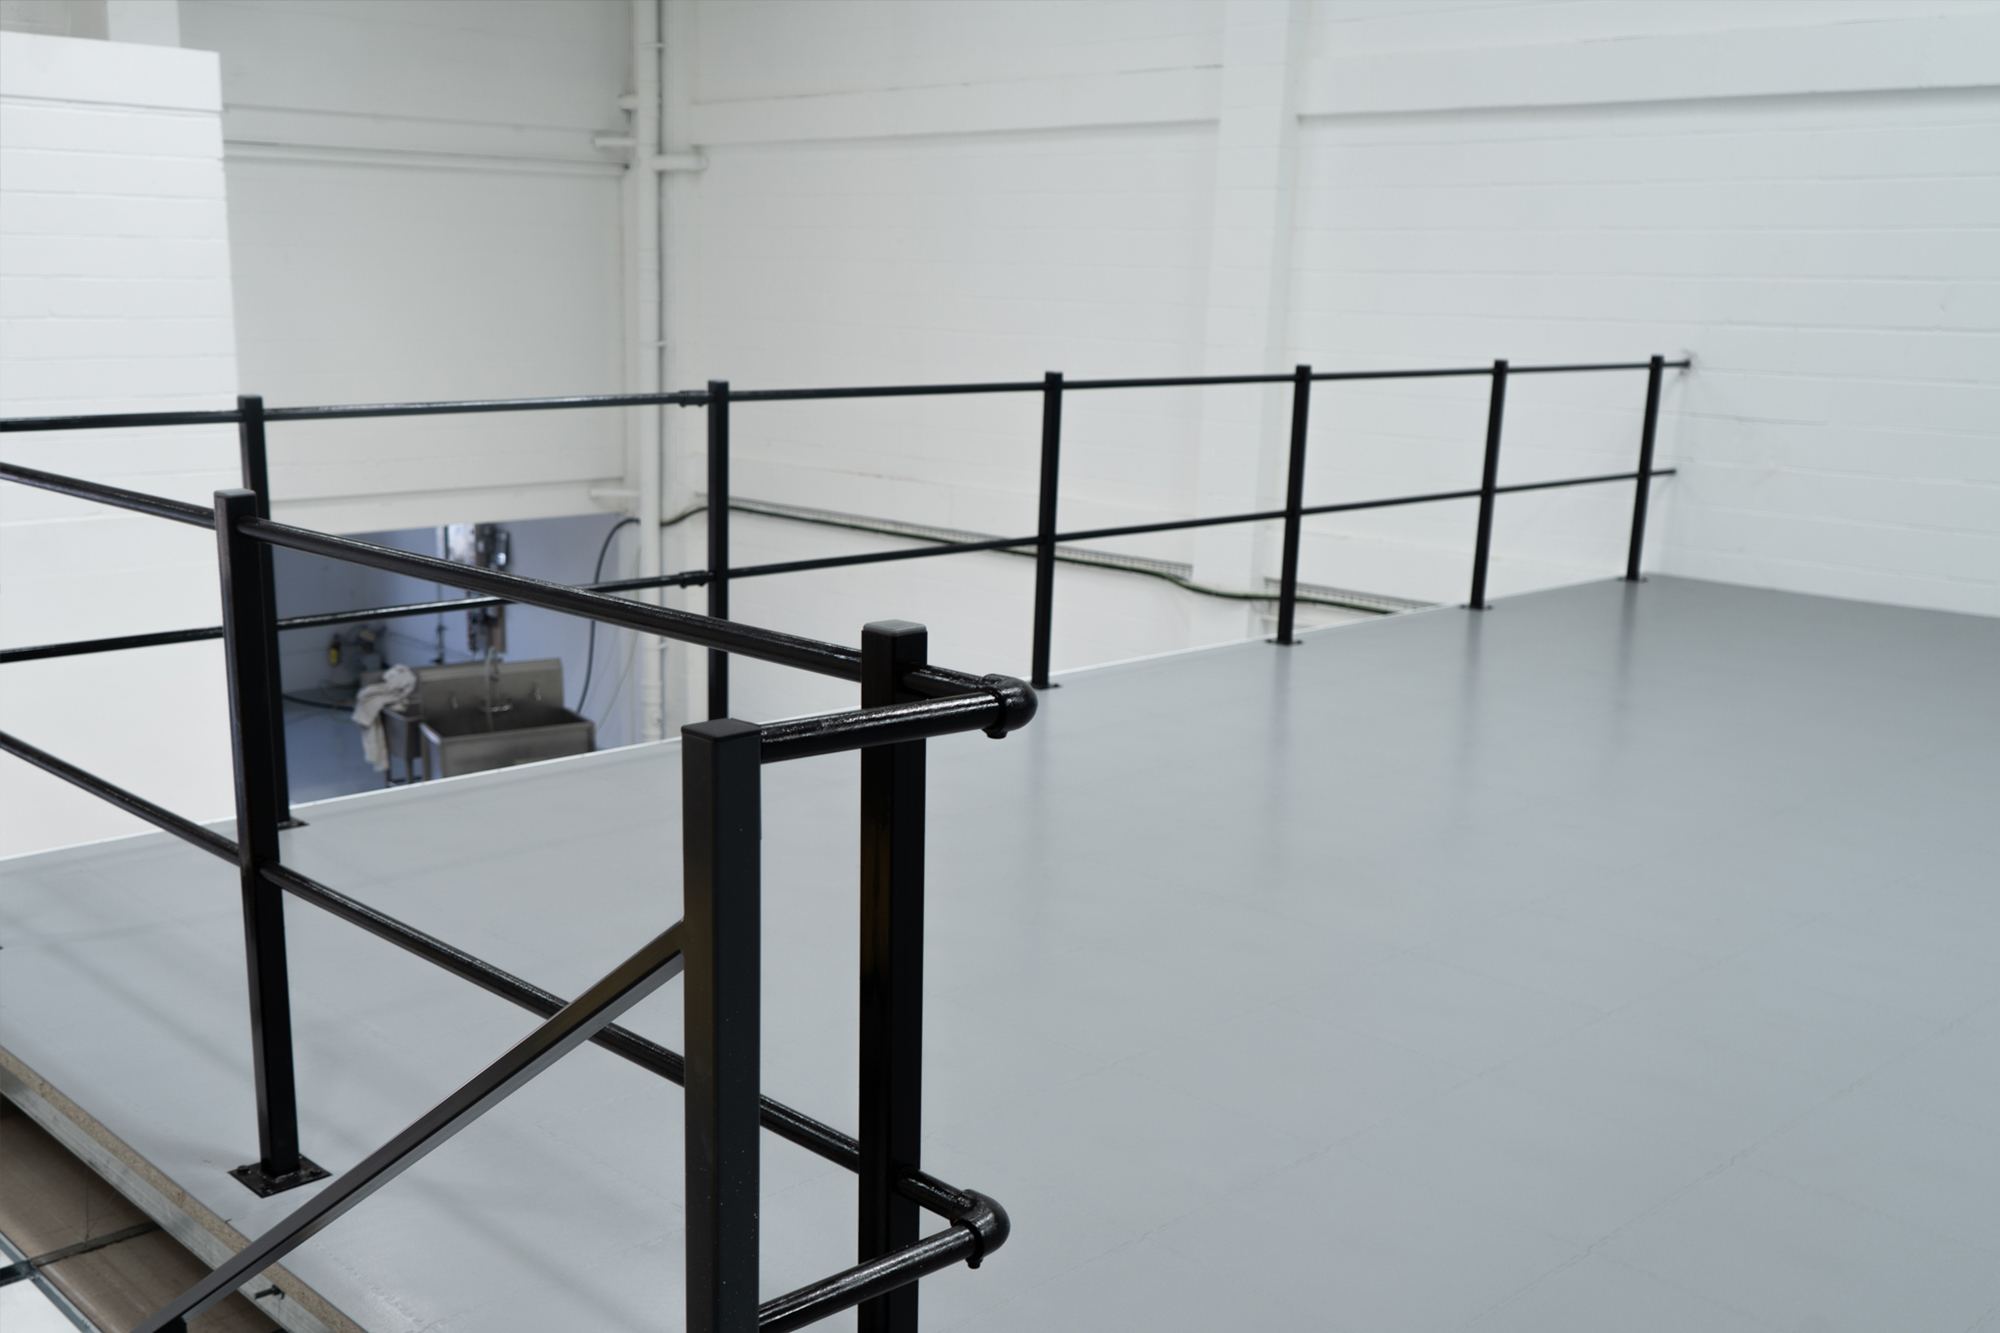 Mezzanine Safety Barriers With Ecotile Floor